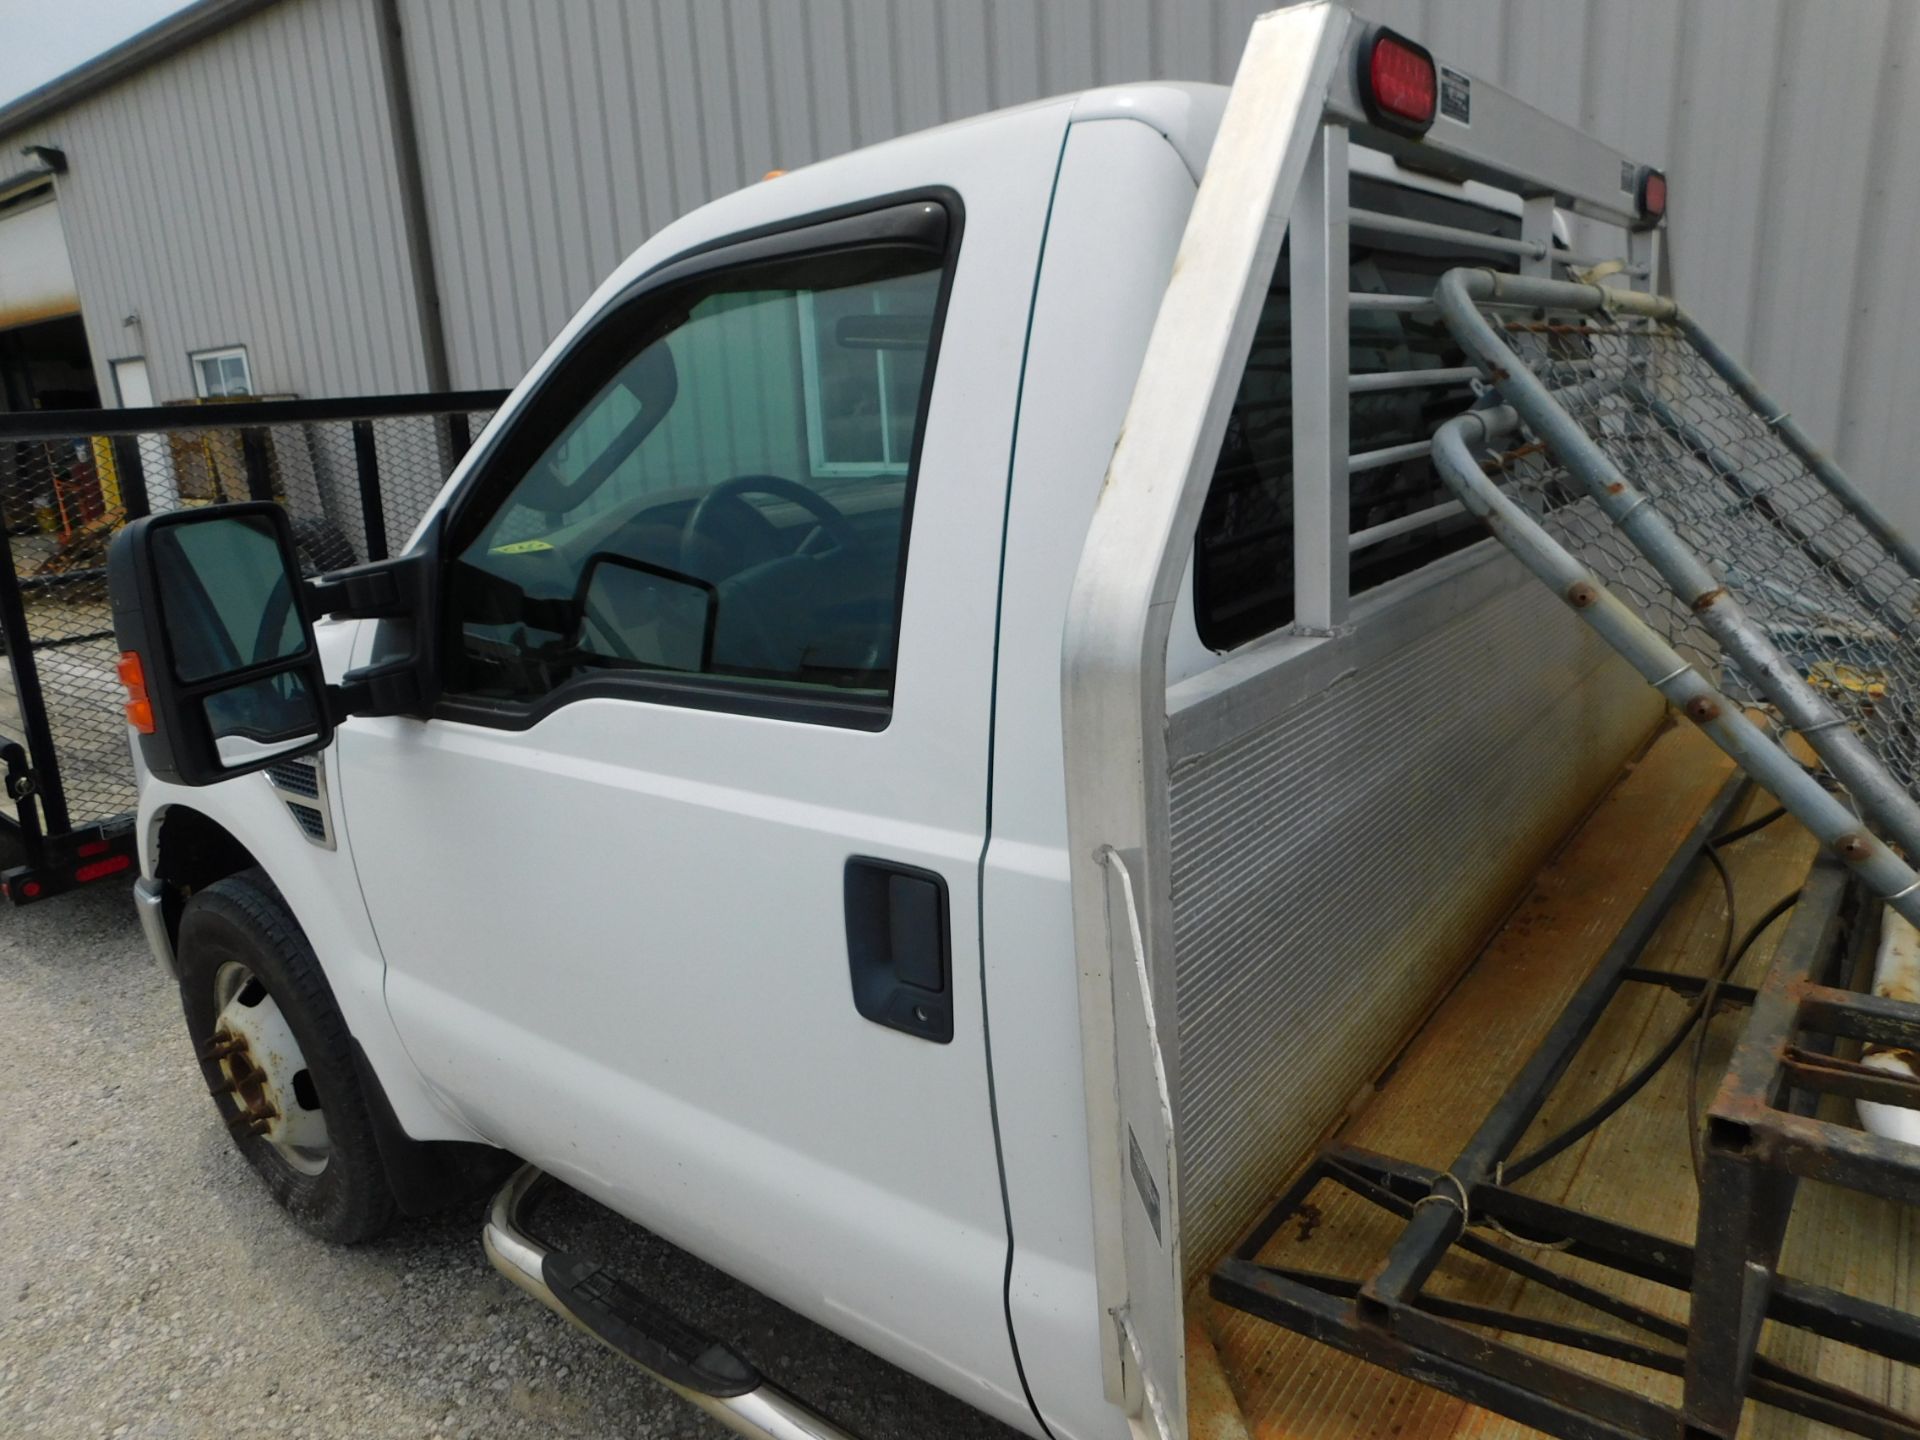 2009 Ford F350 XL Super Duty Stake Bed Truck, VIN 1FDWF36529EA03362, Gas, 123,288 Miles, 12 Ft. X - Image 8 of 22